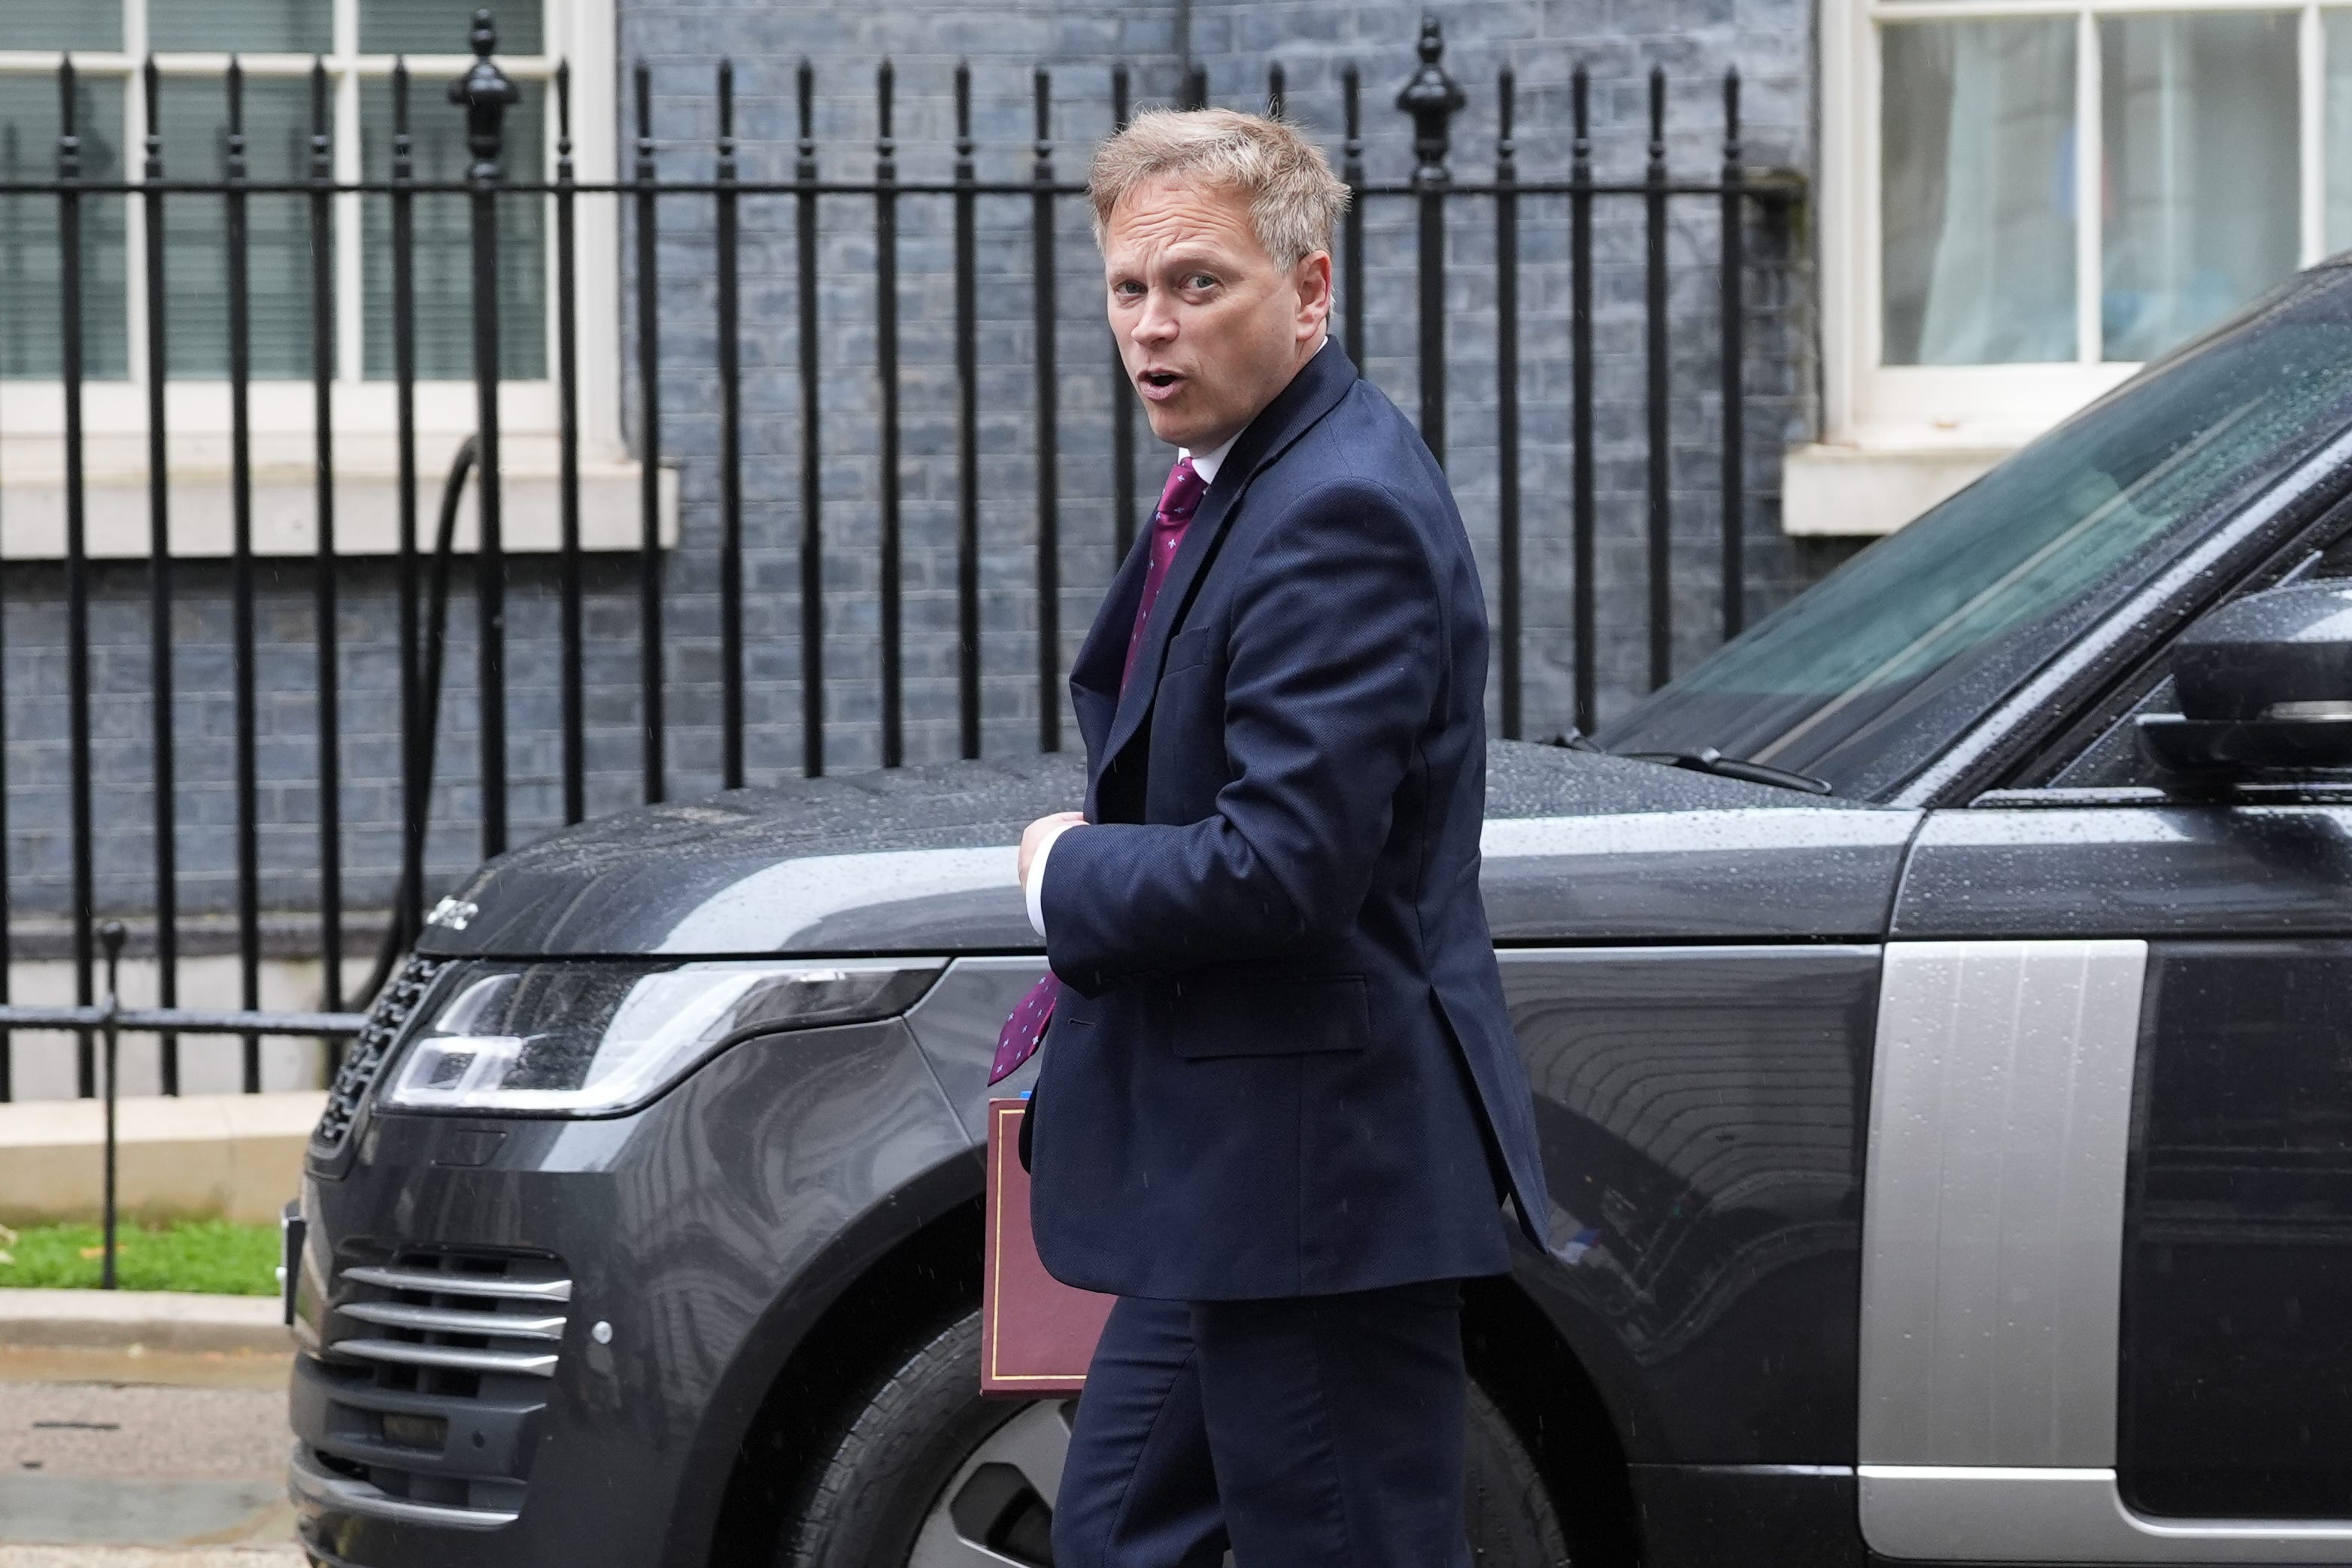 Defence Secretary Grant Shapps said he was ‘a realist’ when asked about the election outcome